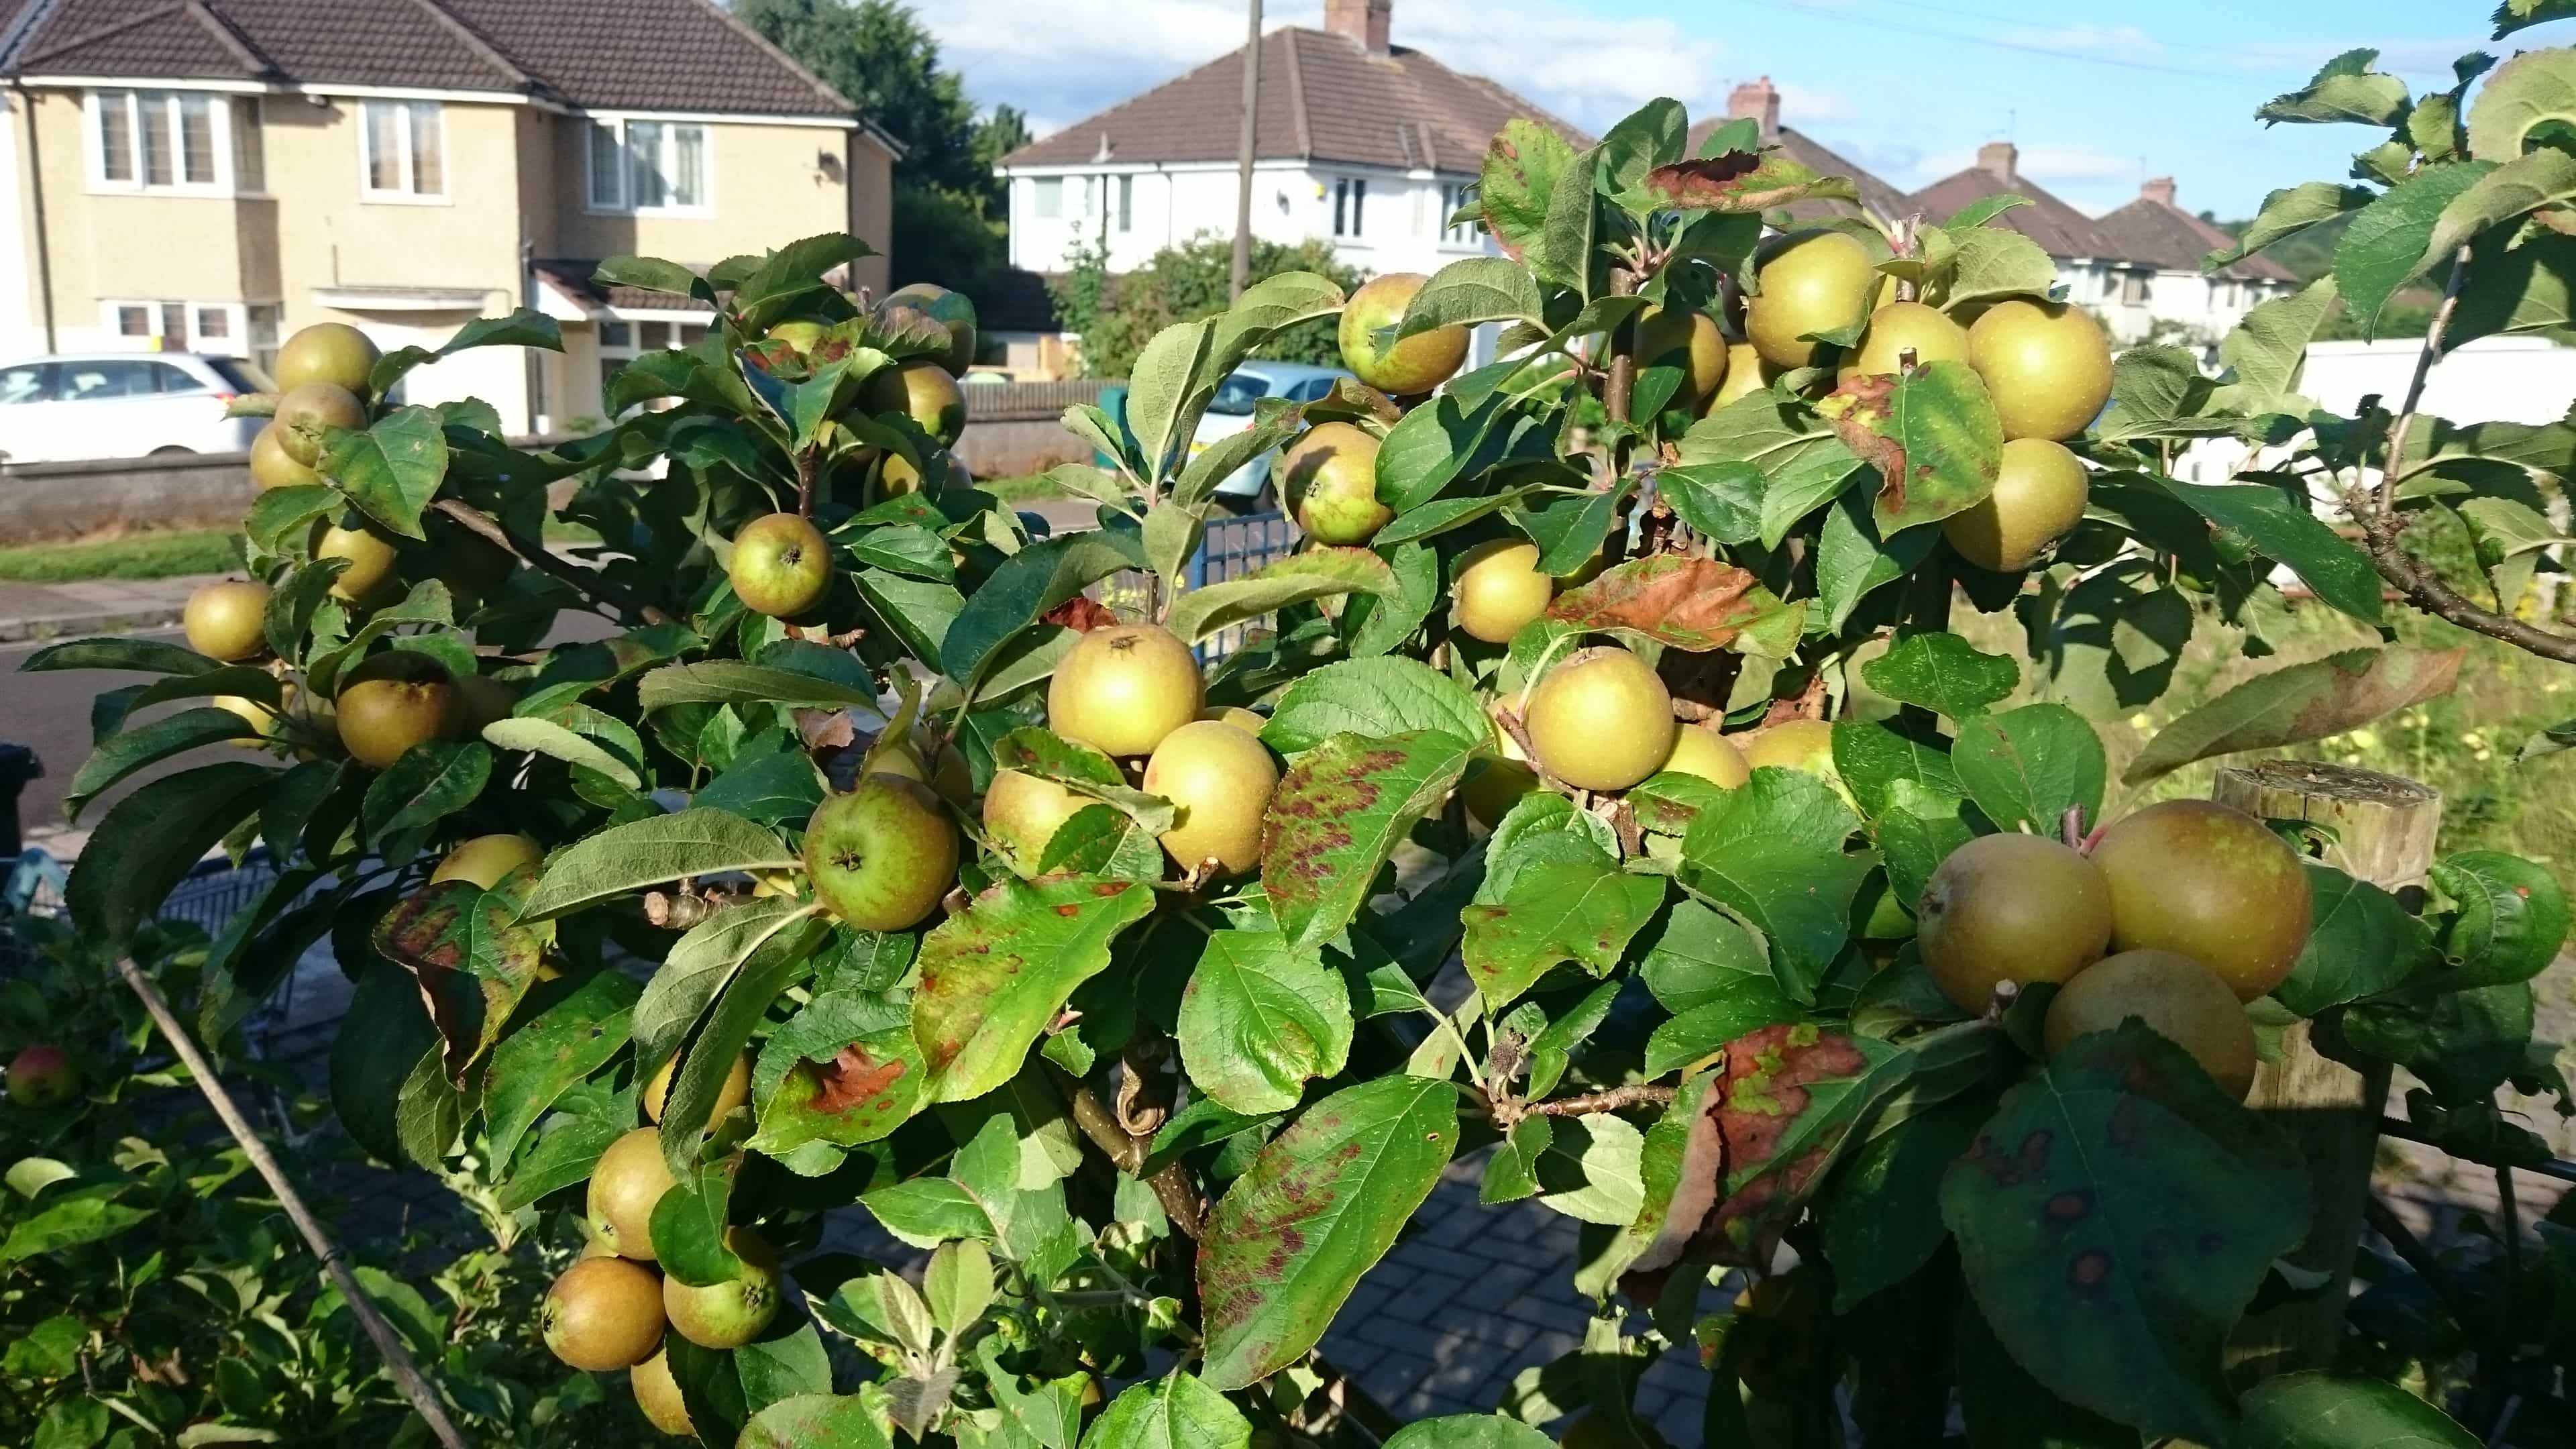 A Hedgerow of Apples